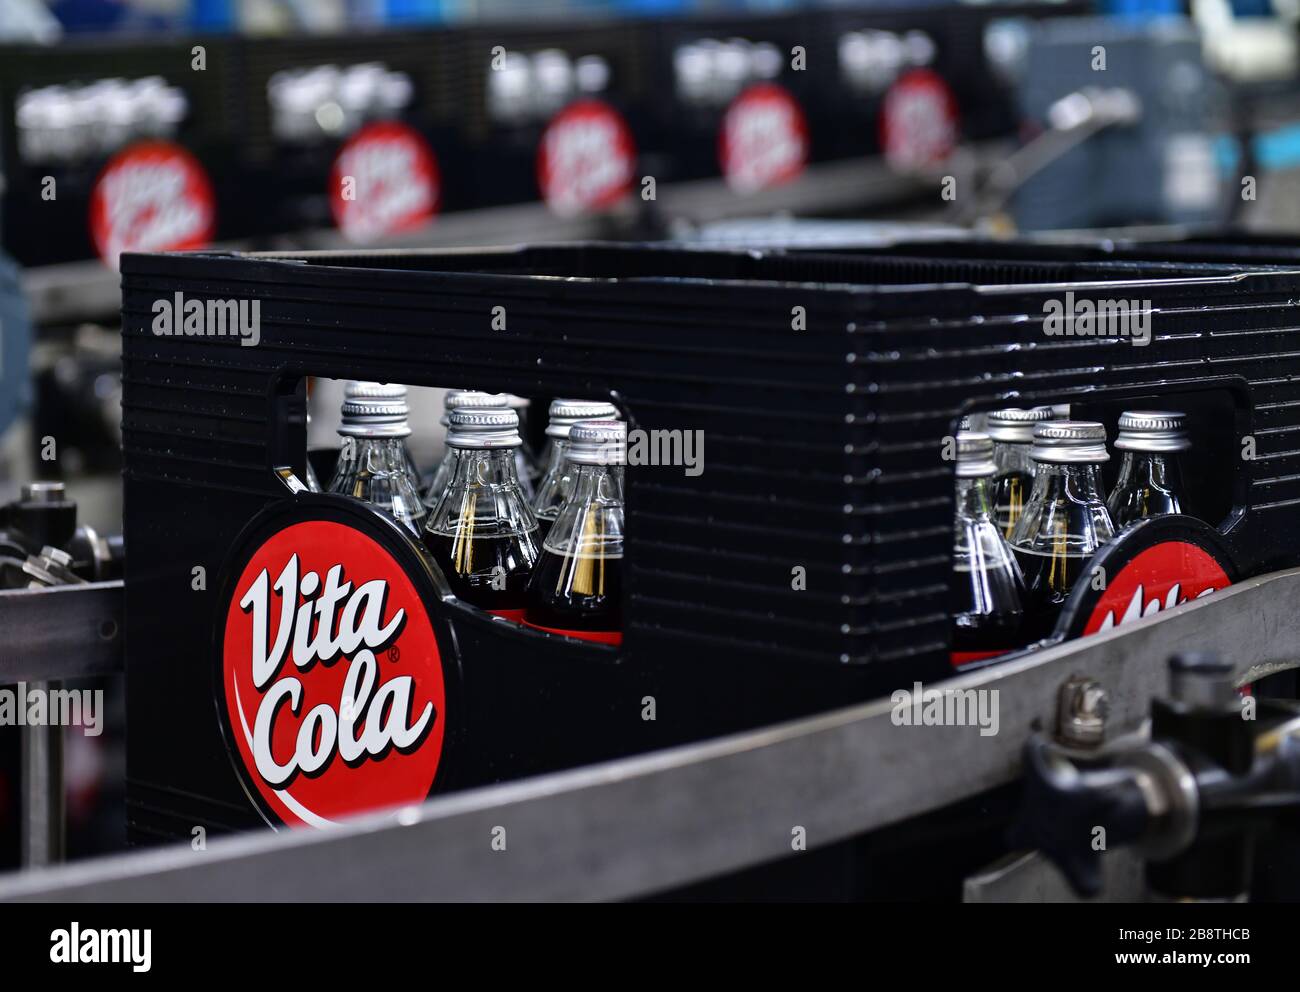 Lichtenau, Germany. 19th Mar, 2020. After filling Vita Cola, the 0.33 litre returnable glass bottles are transported in crates on the conveyor system. Vita Cola is owned by Thüringer Waldquell GmbH in Schmalkalden, which is part of the Hassia Group in Hesse. Credit: Martin Schutt/dpa-Zentralbild/dpa/Alamy Live News Stock Photo